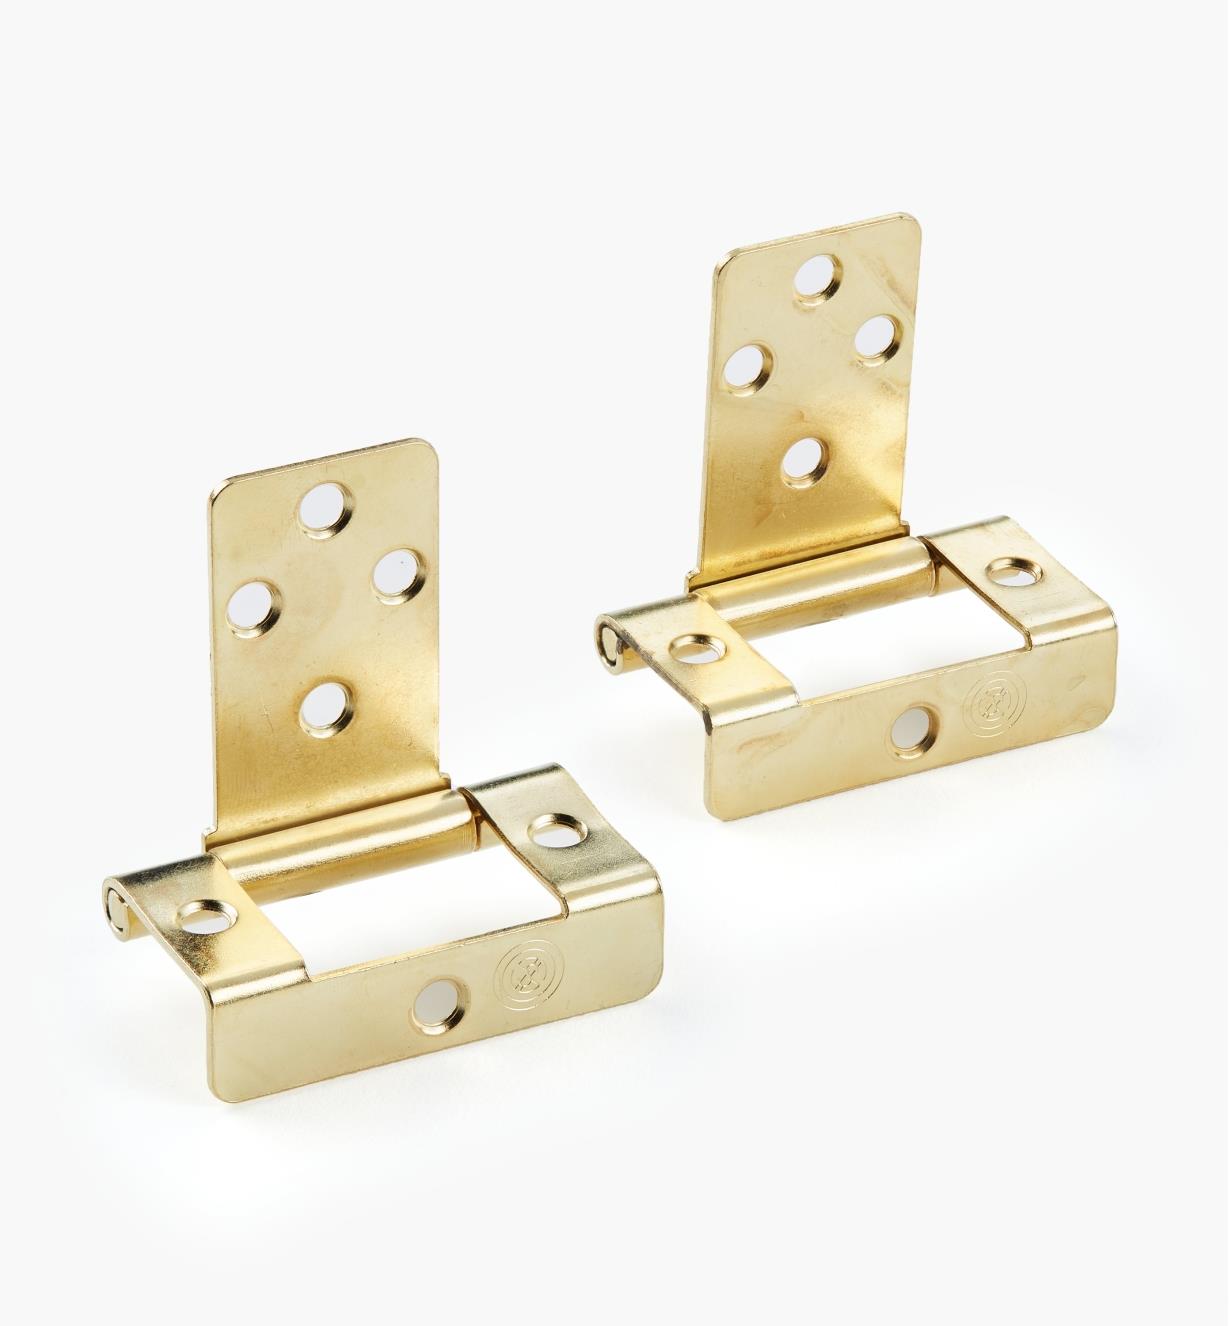 00H6012 - 3/4" Brass Plate No-Mortise Lid Hinges, pr.